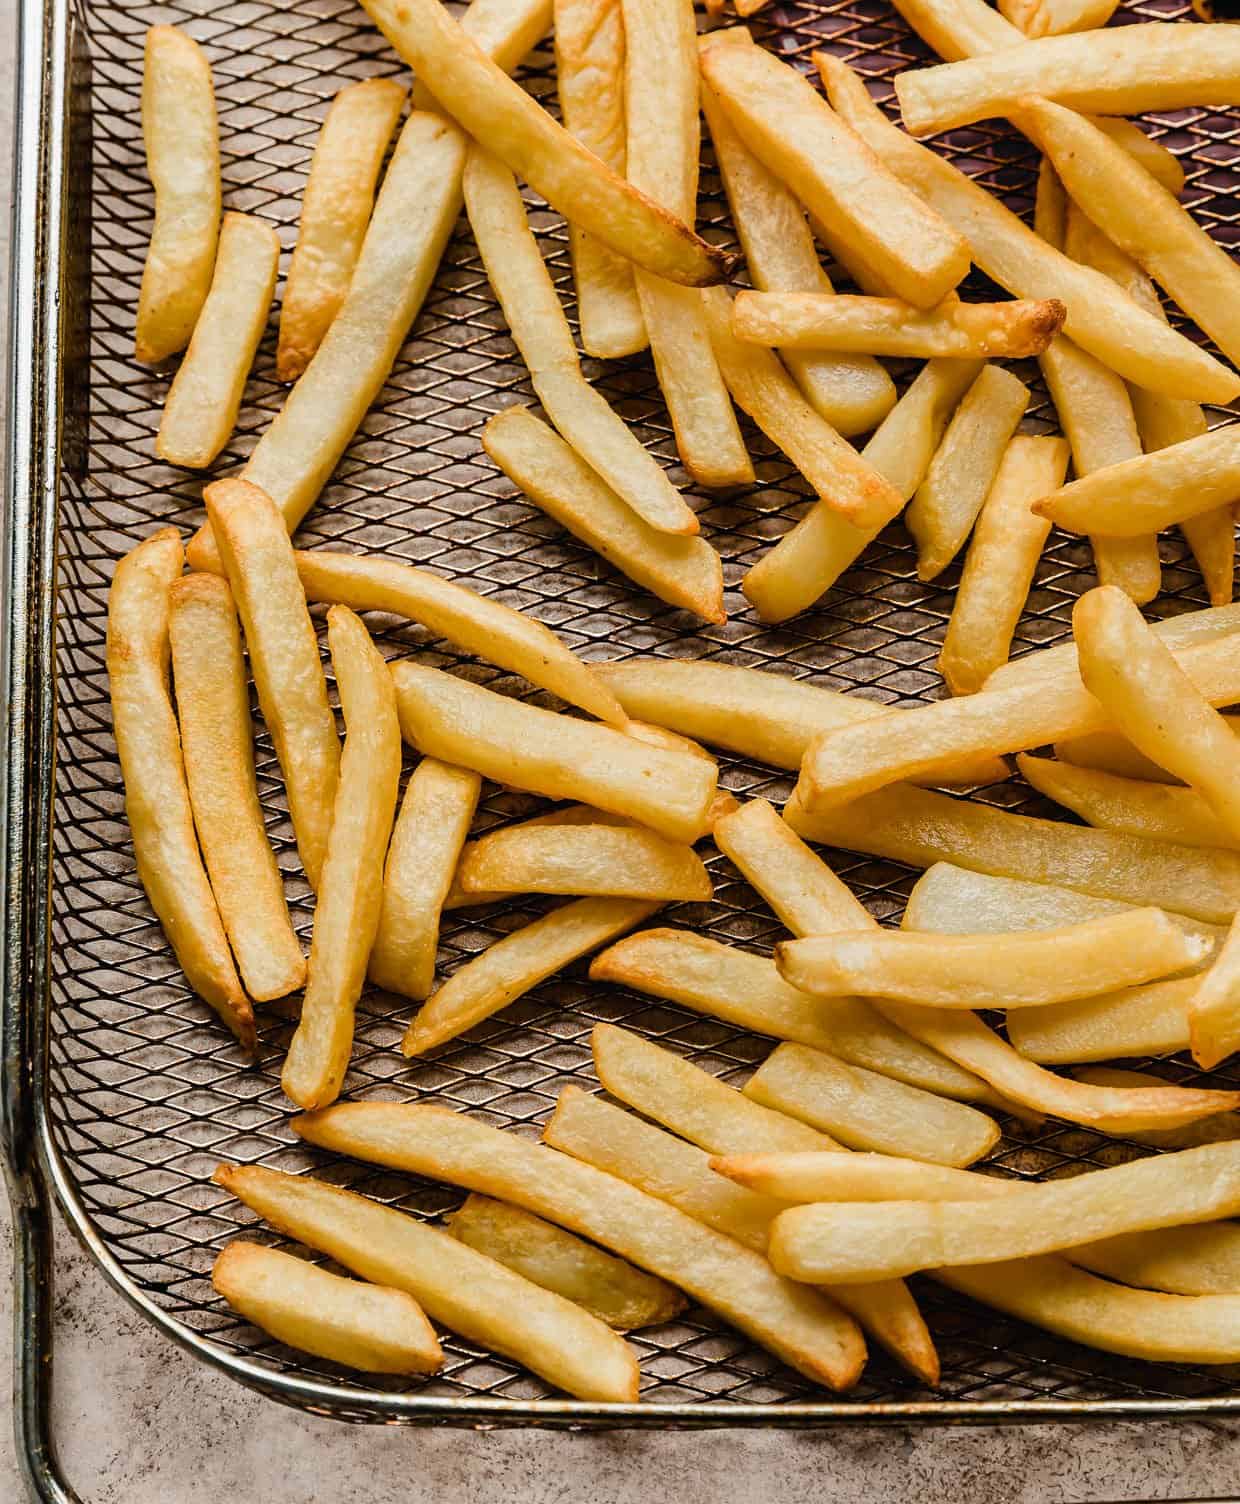 frozen French fries that were made in the air fryer, now golden and crispy on a metal air fryer basket.